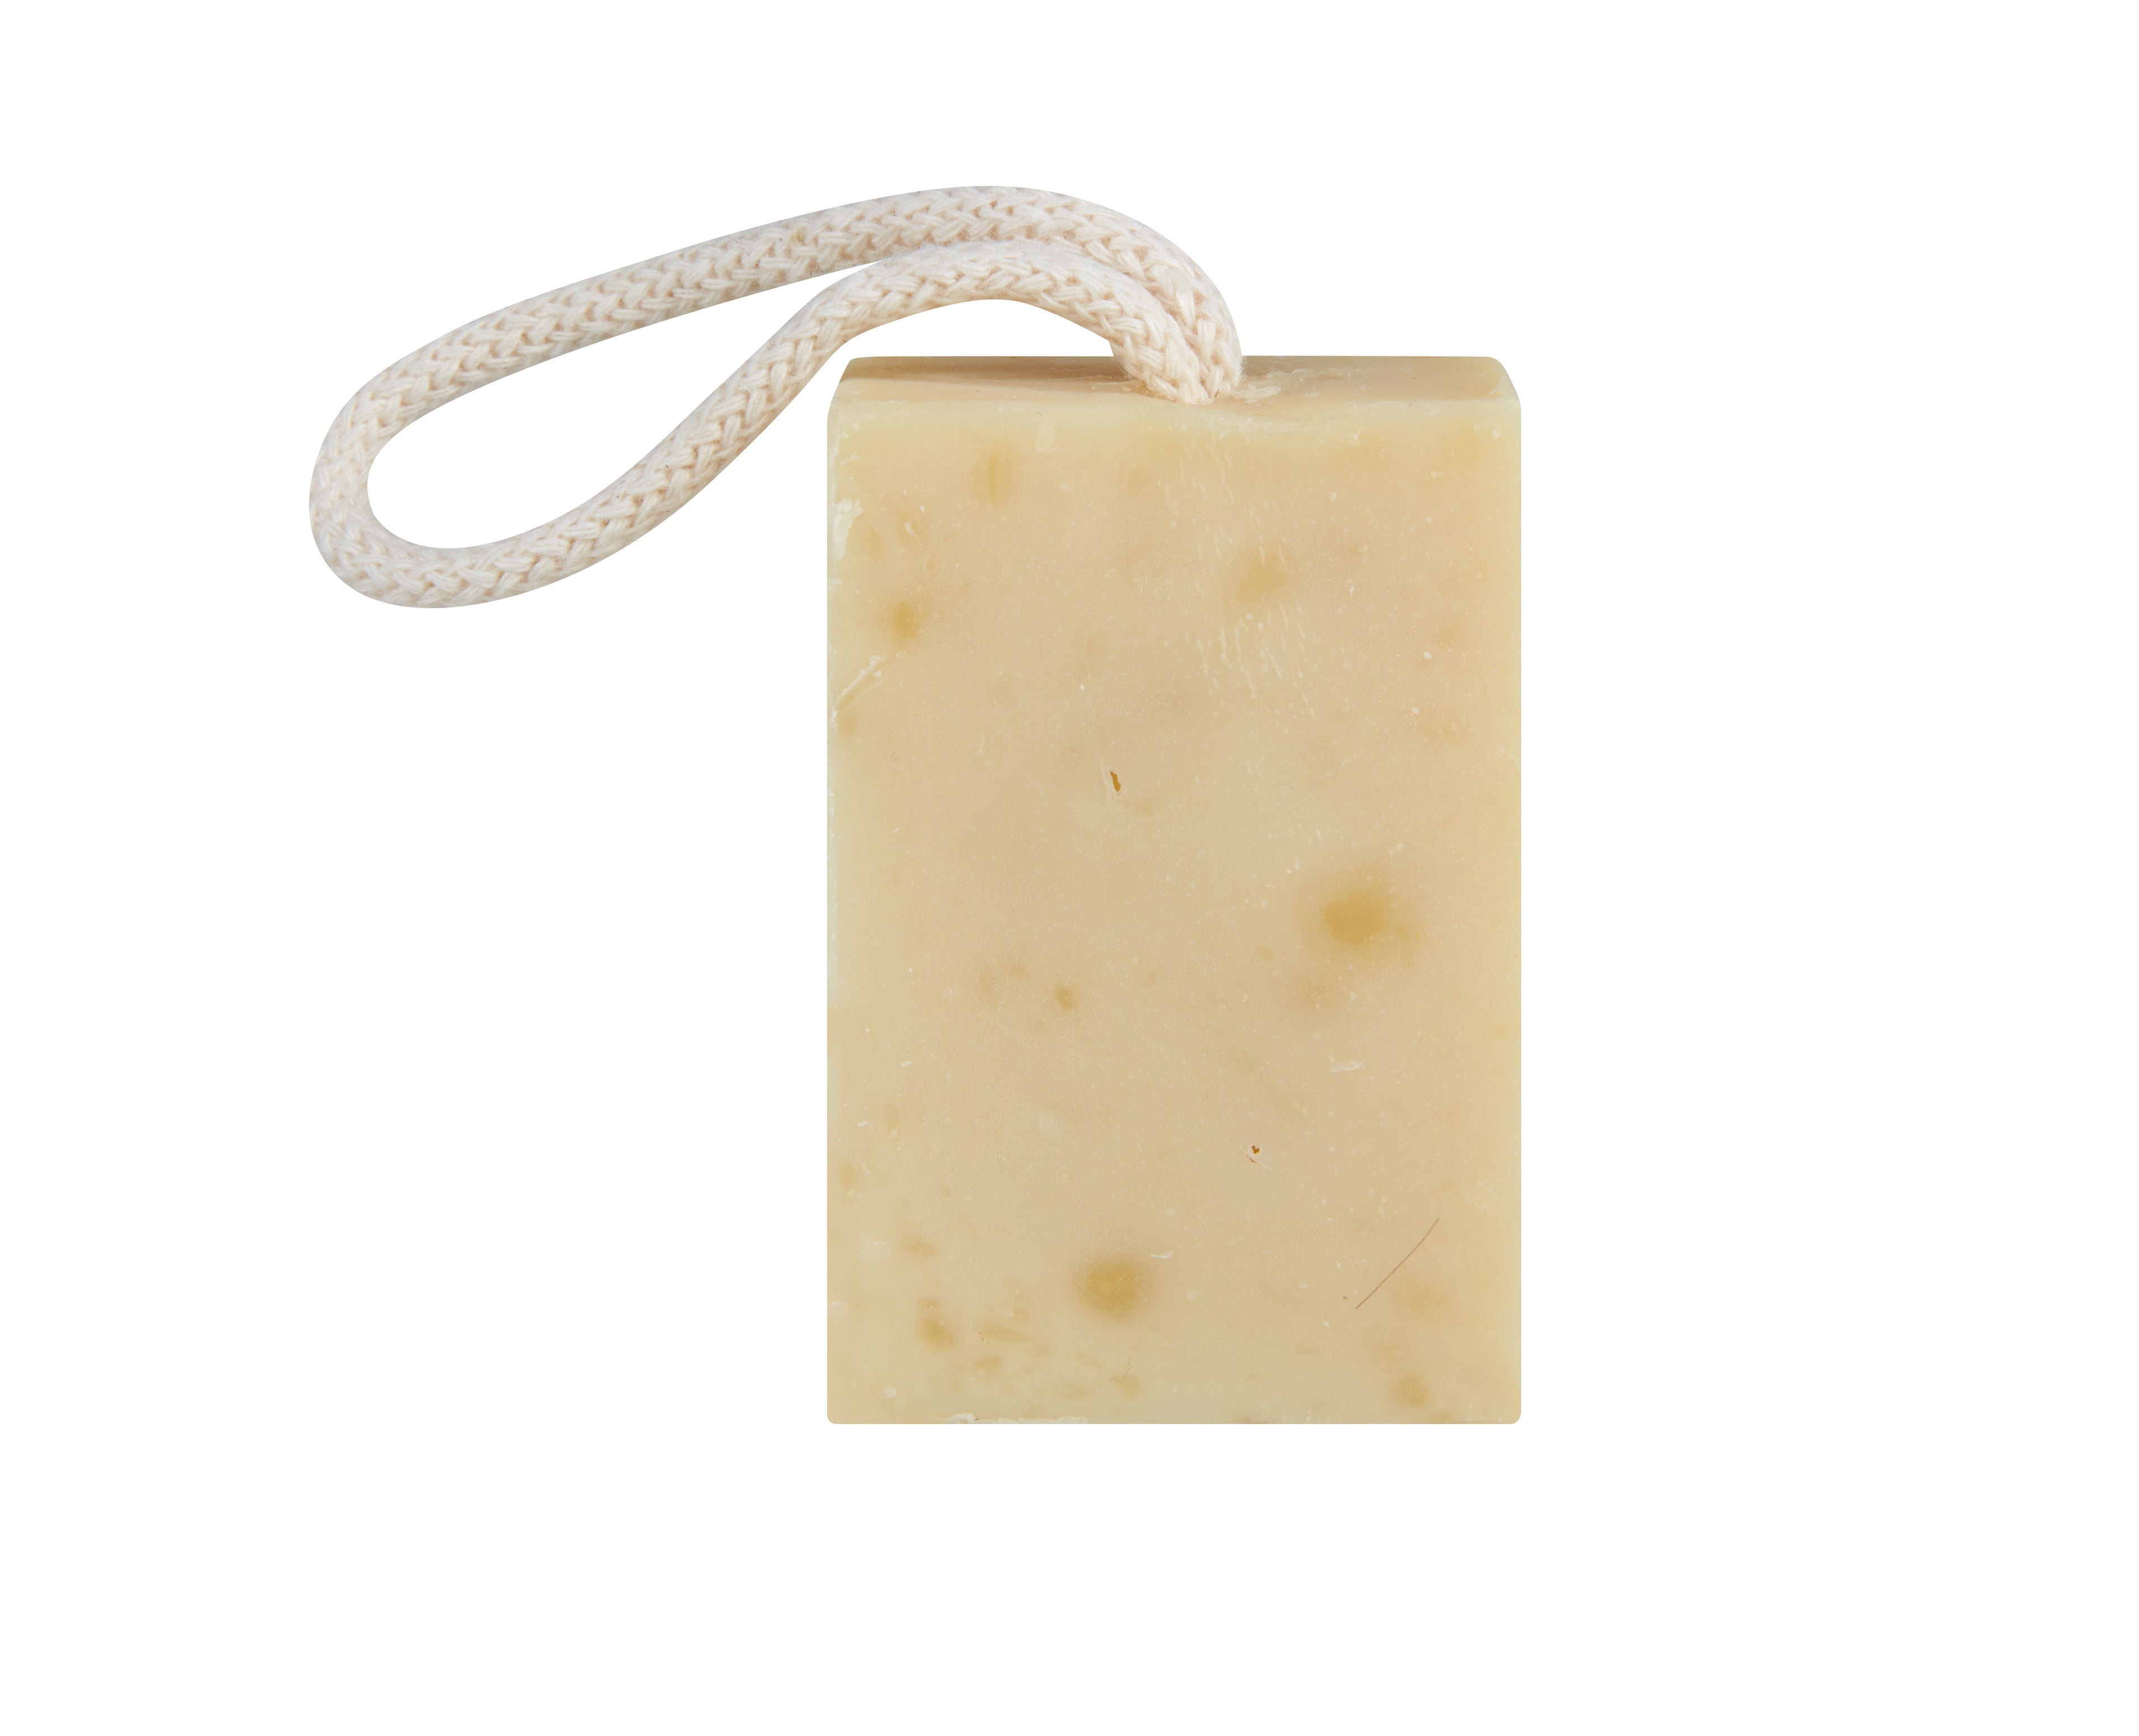 A rectangular soap bar with a looped rope attached to one end